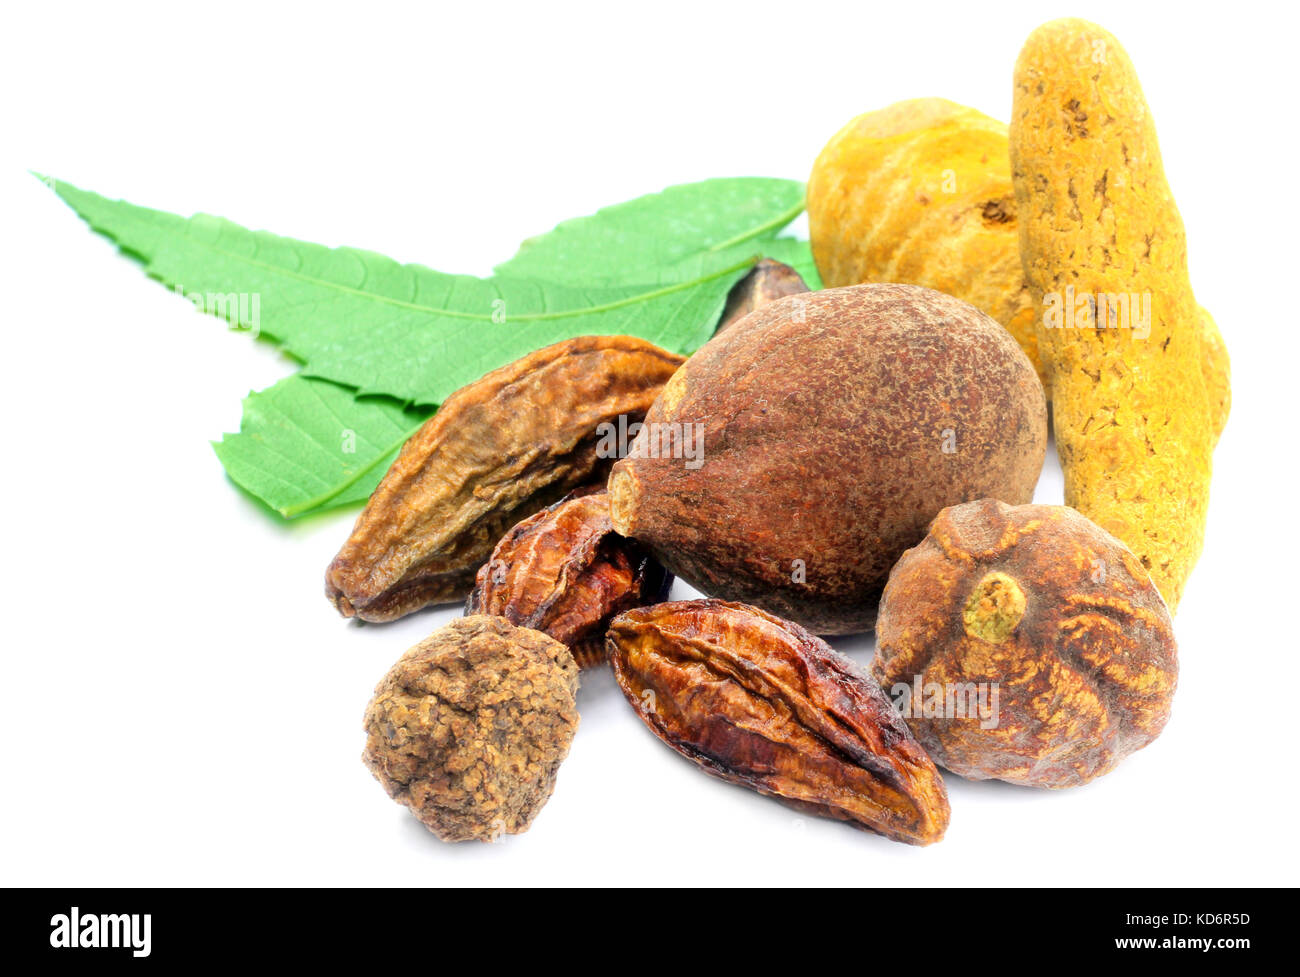 A combination of herbal foods on white background Stock Photo